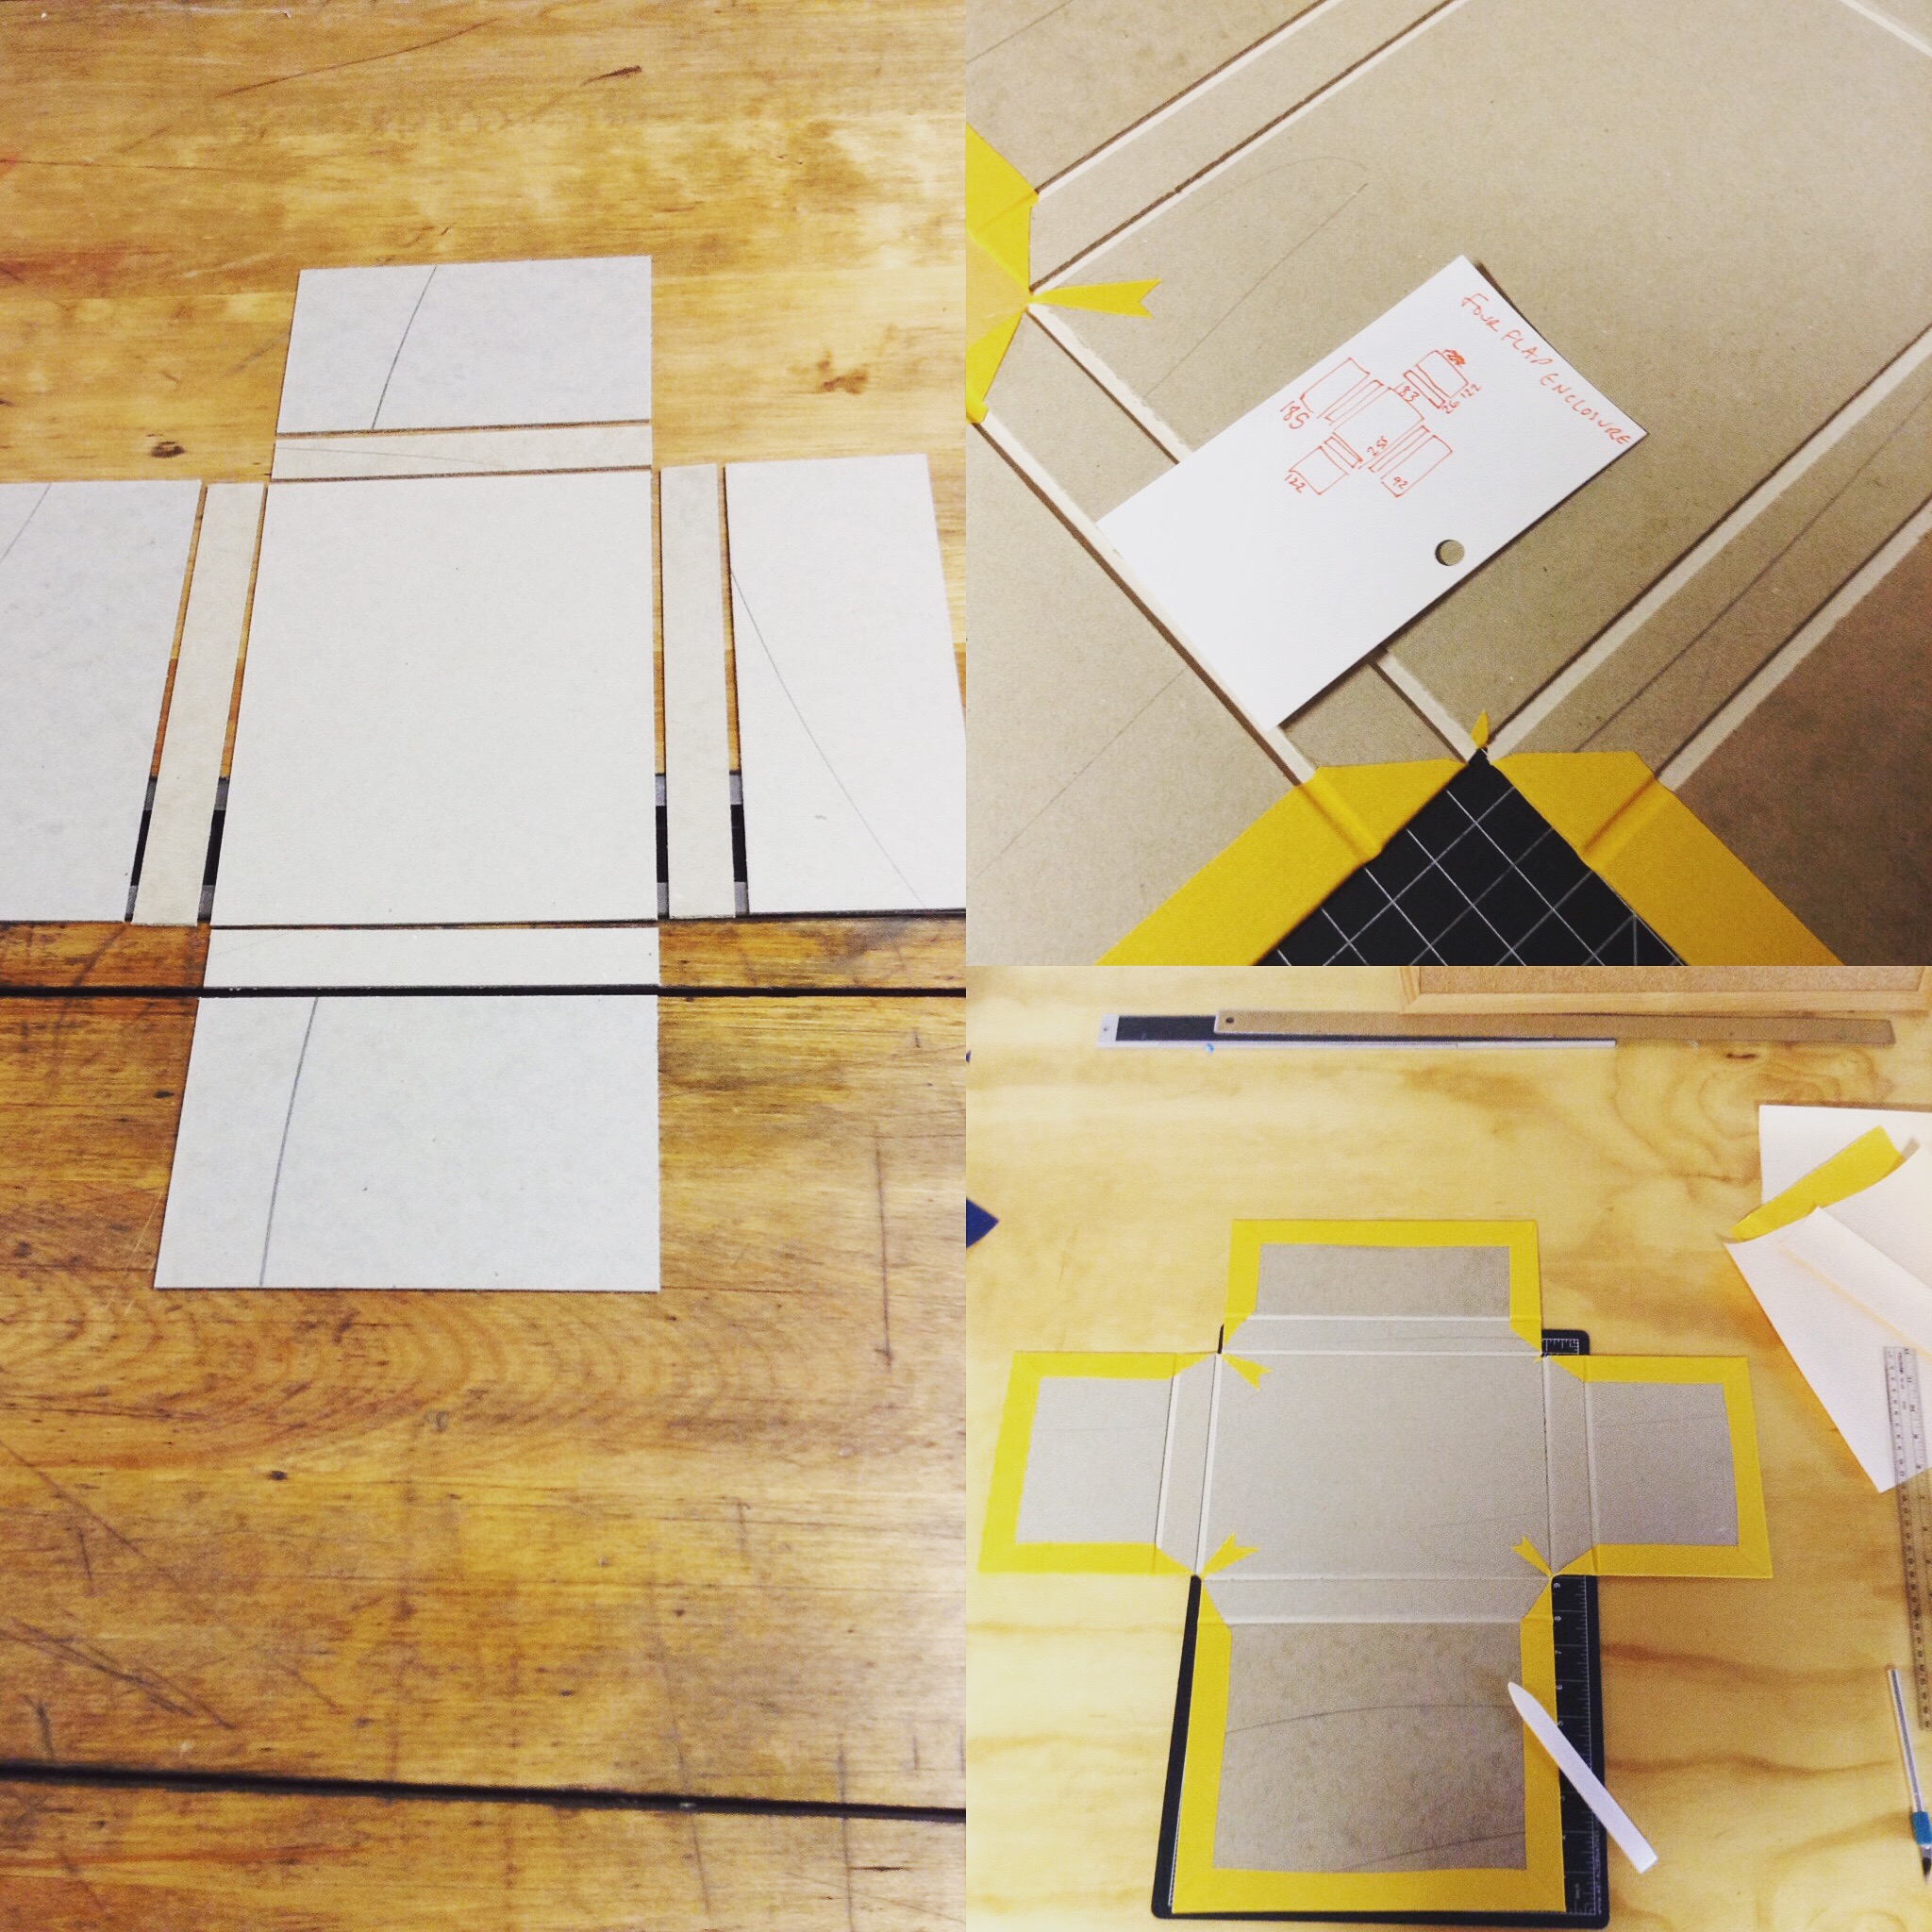  Different images showing a few try outs of making the four flap enclosure. 